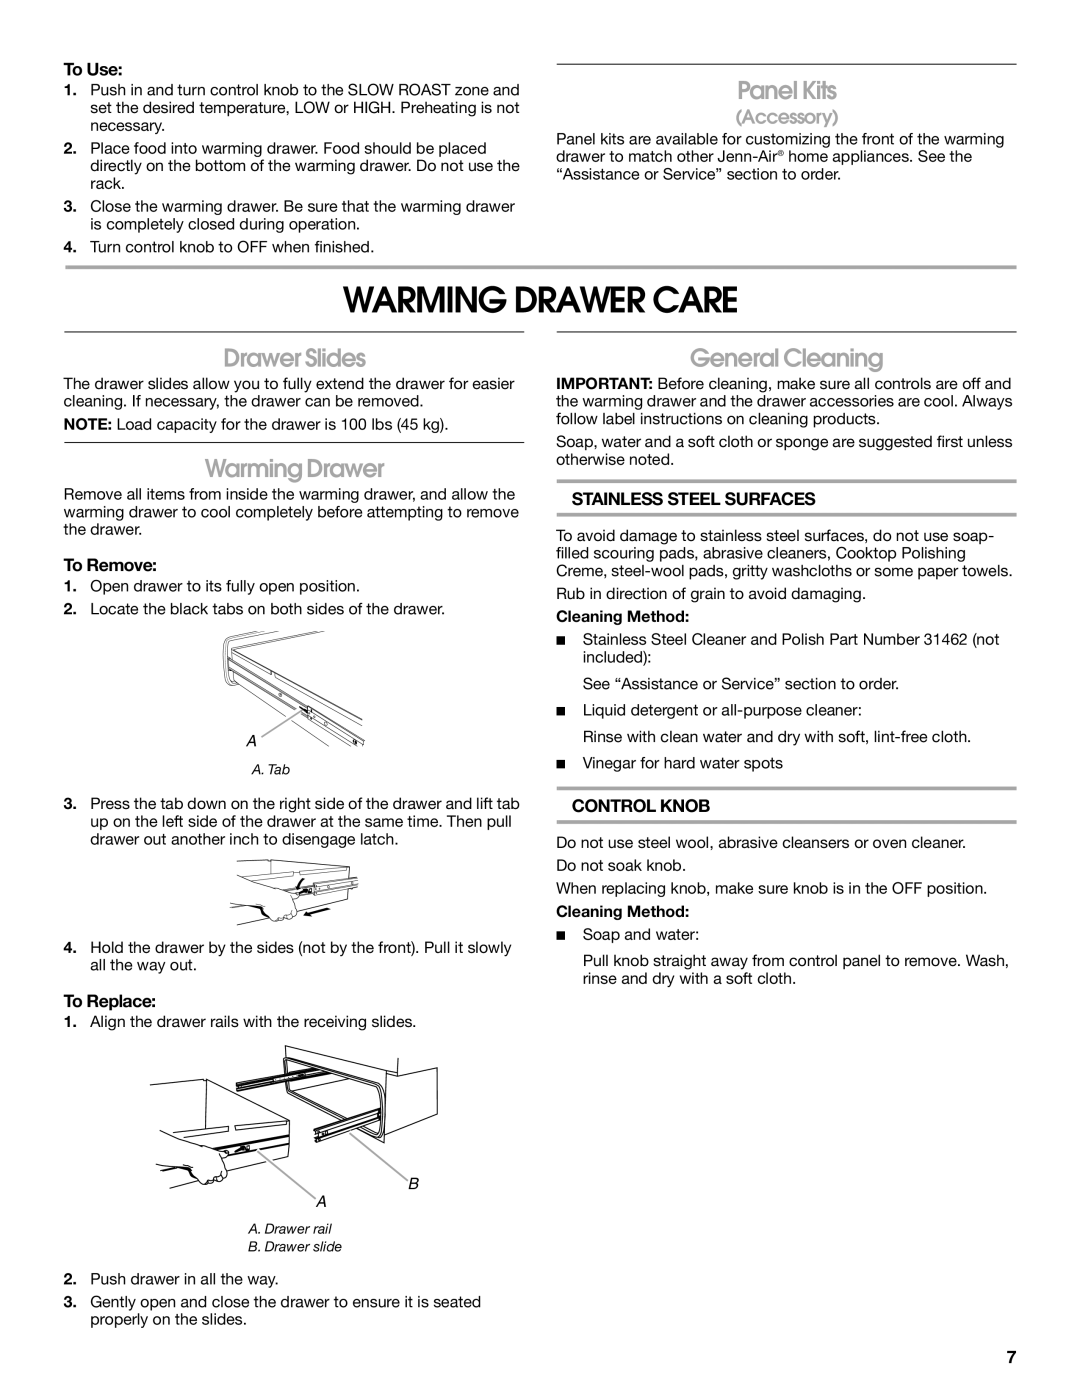 Jenn-Air JWD2030WS manual Warming Drawer Care, Panel Kits, Drawer Slides, General Cleaning, Accessory 